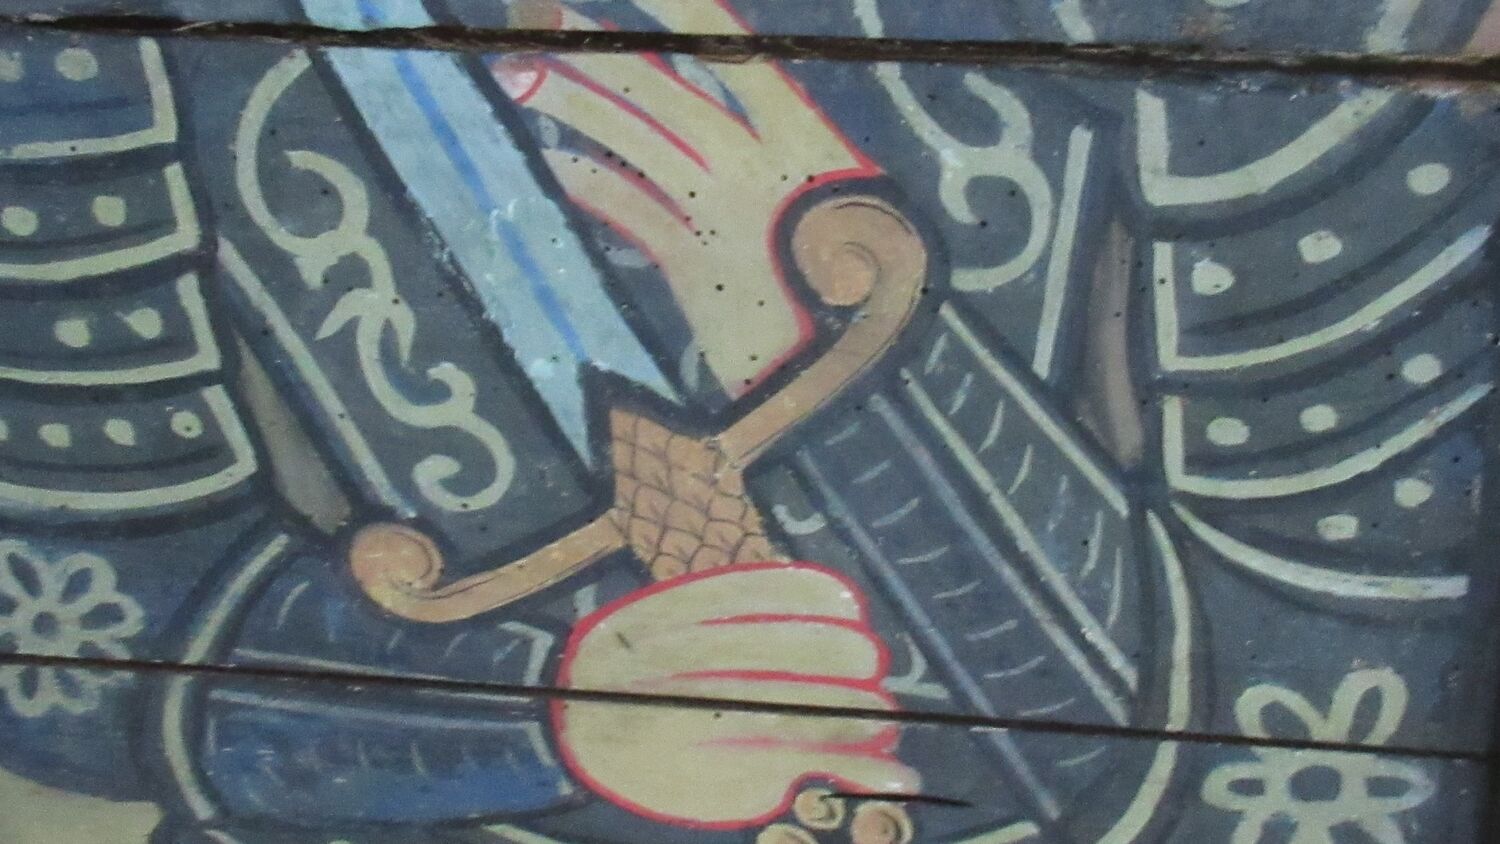 A close-up image detailing the medieval painting of a knight's torso, wearing armour and holding a sword across his body.